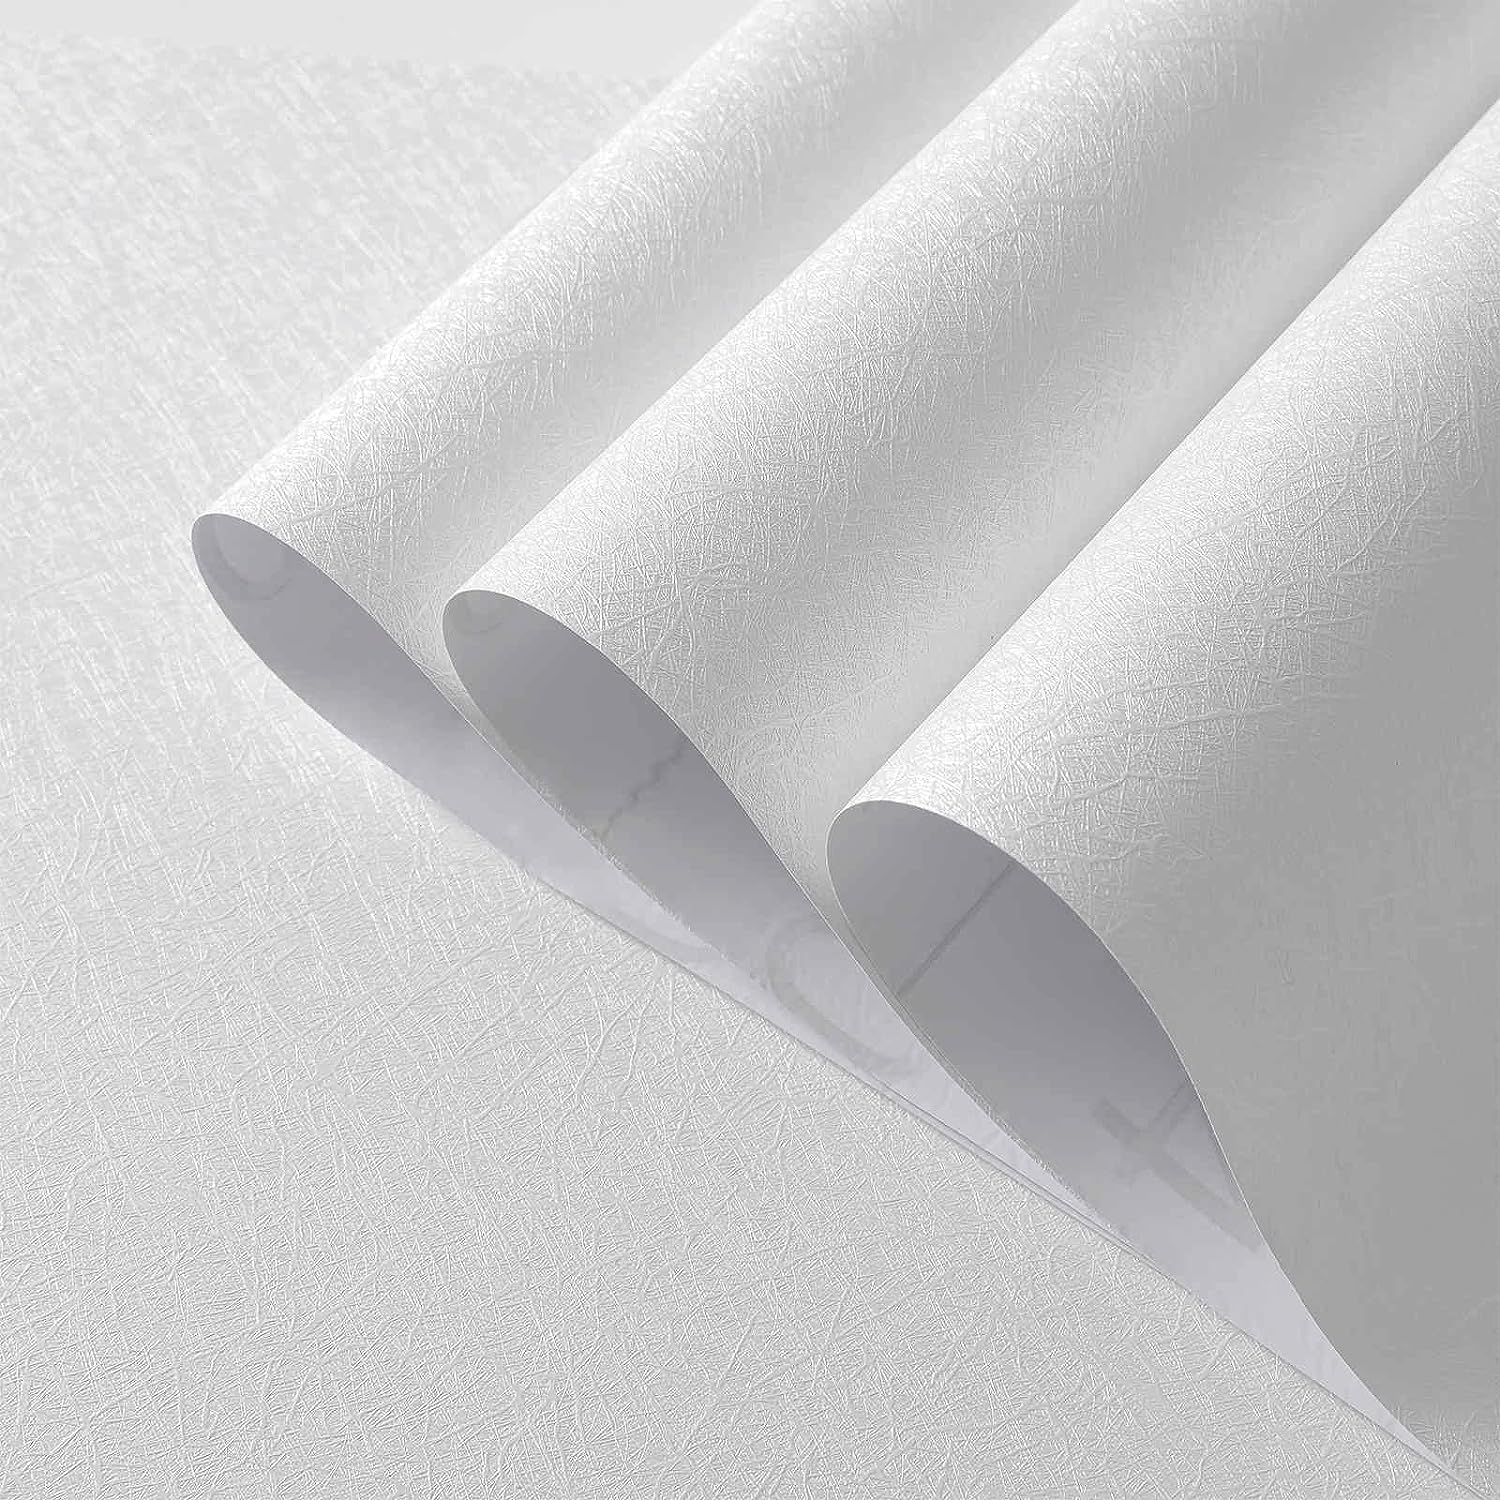 Matte Black/ Grey Wallpaper Vinyl Self-Adhesive Shelf Liner Drawer Peel and  Stick Countertop Removable Contact Paper Wall Decor - AliExpress